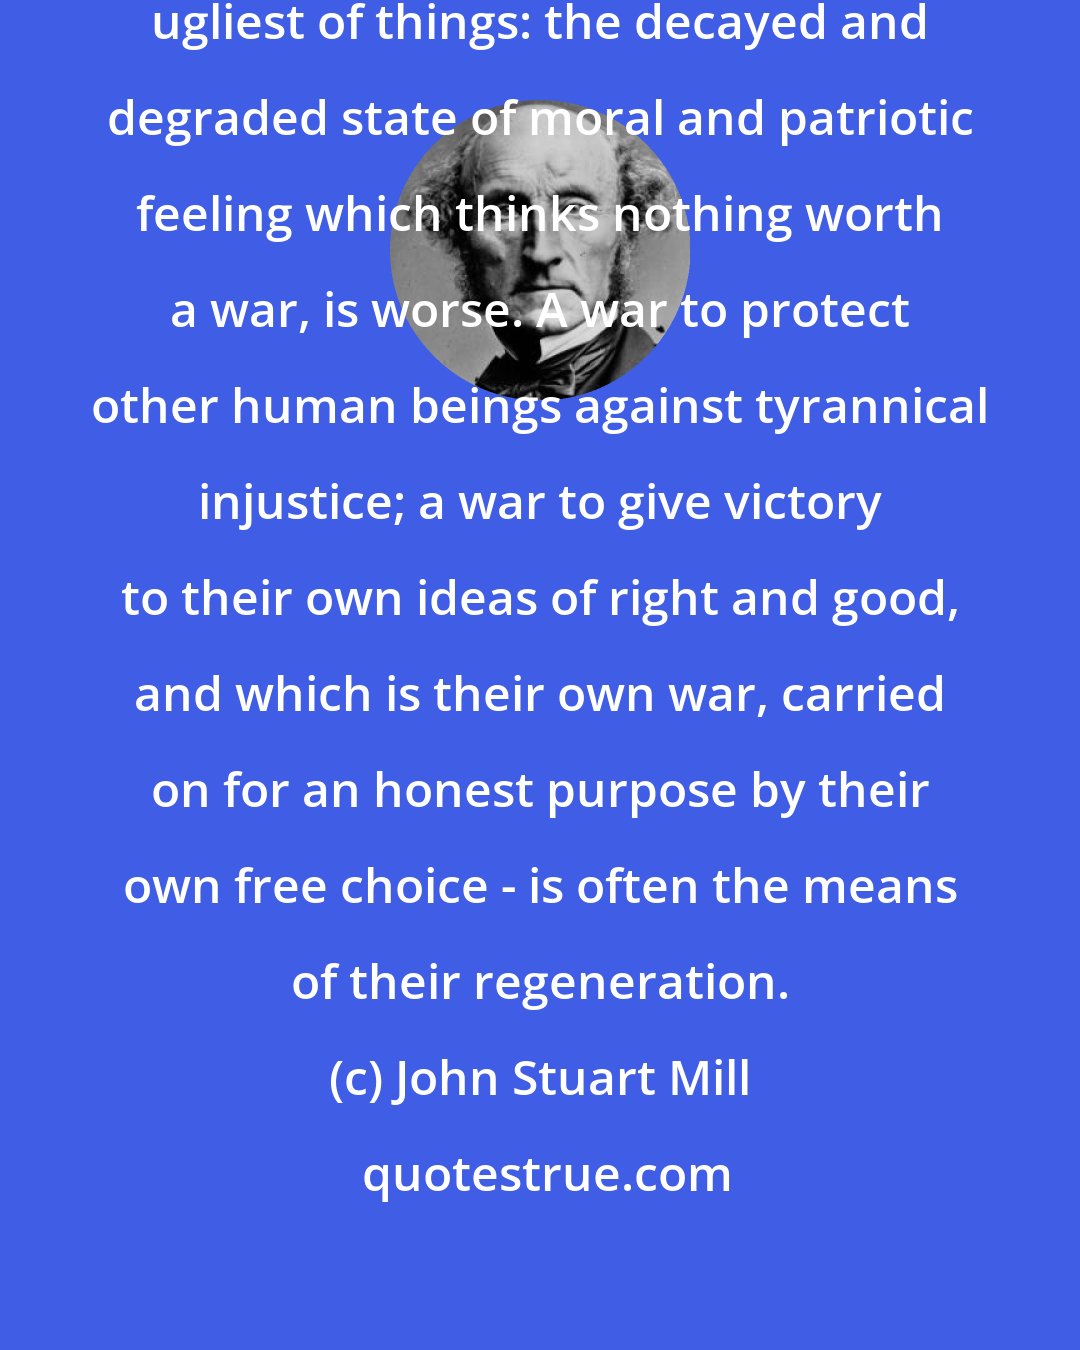 John Stuart Mill: War is an ugly thing, but not the ugliest of things: the decayed and degraded state of moral and patriotic feeling which thinks nothing worth a war, is worse. A war to protect other human beings against tyrannical injustice; a war to give victory to their own ideas of right and good, and which is their own war, carried on for an honest purpose by their own free choice - is often the means of their regeneration.